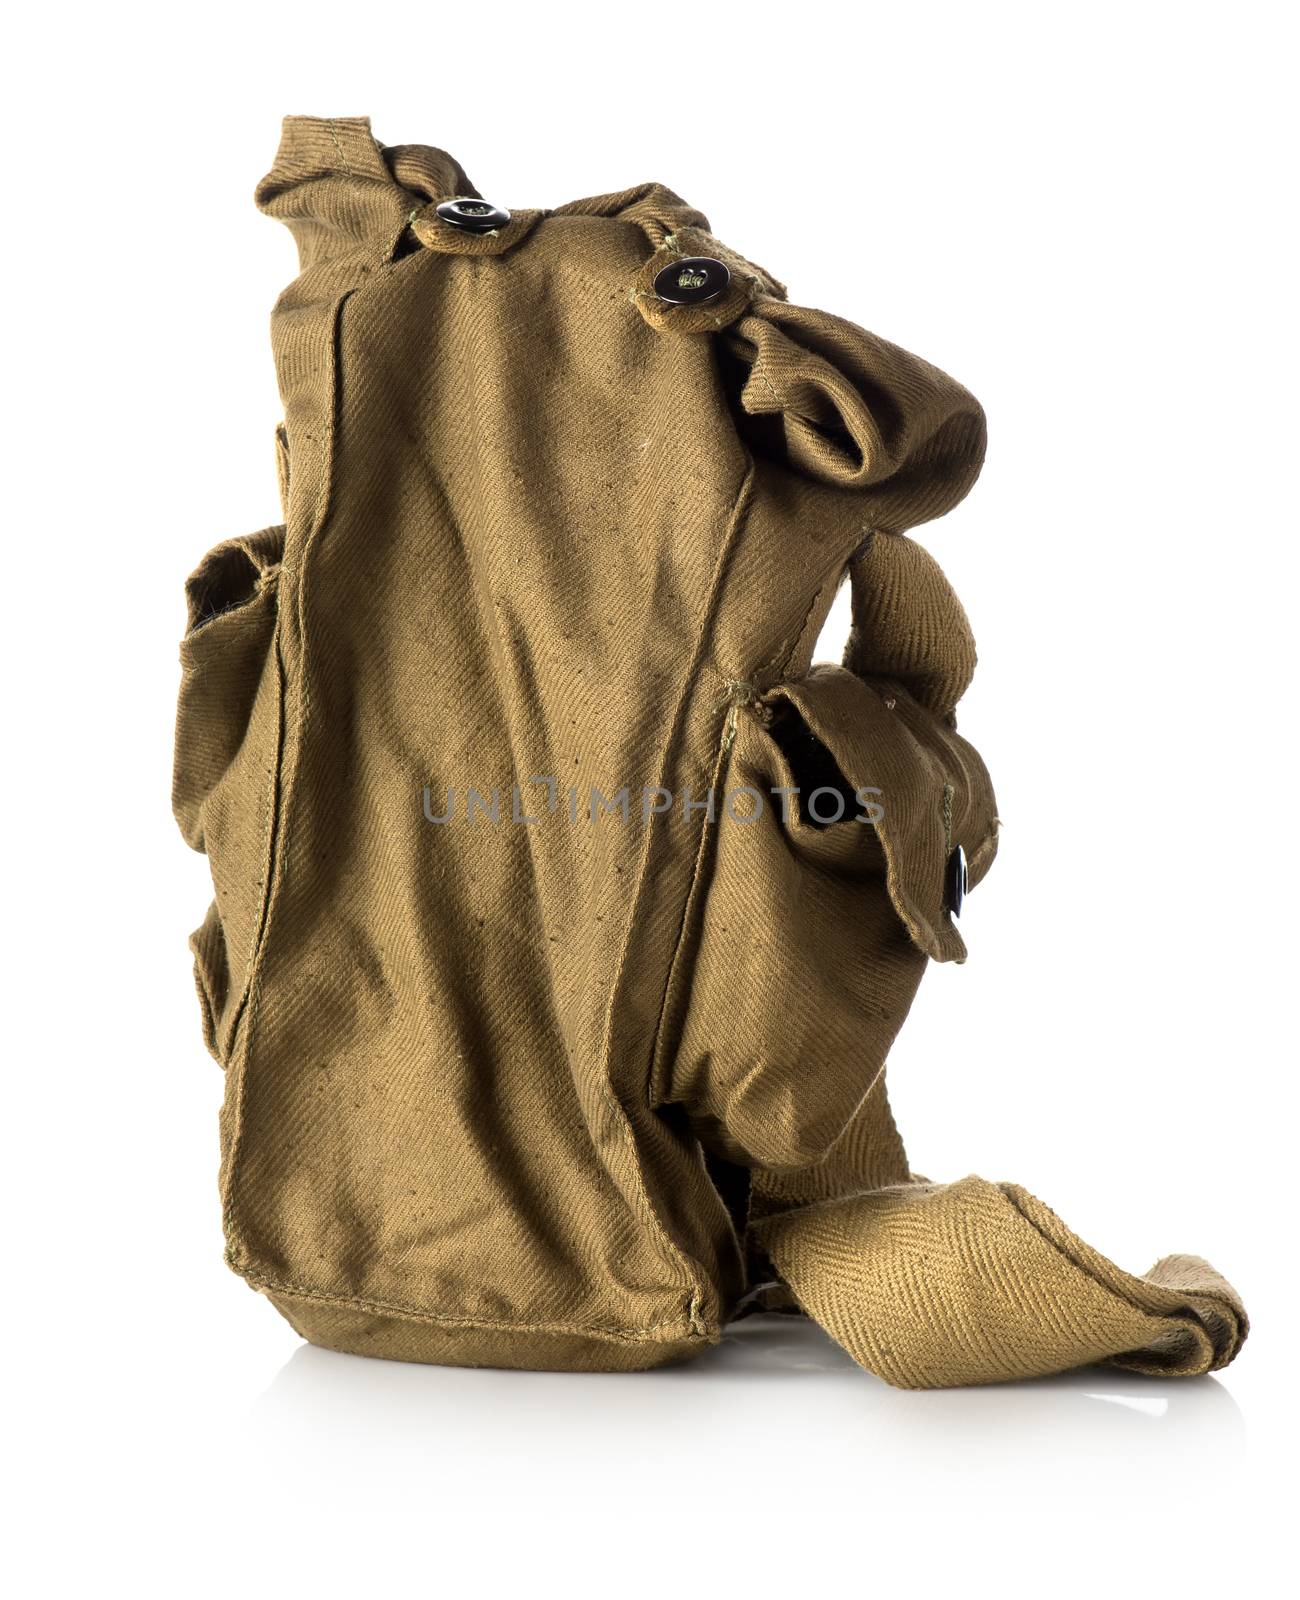 Bag of gas mask by Givaga